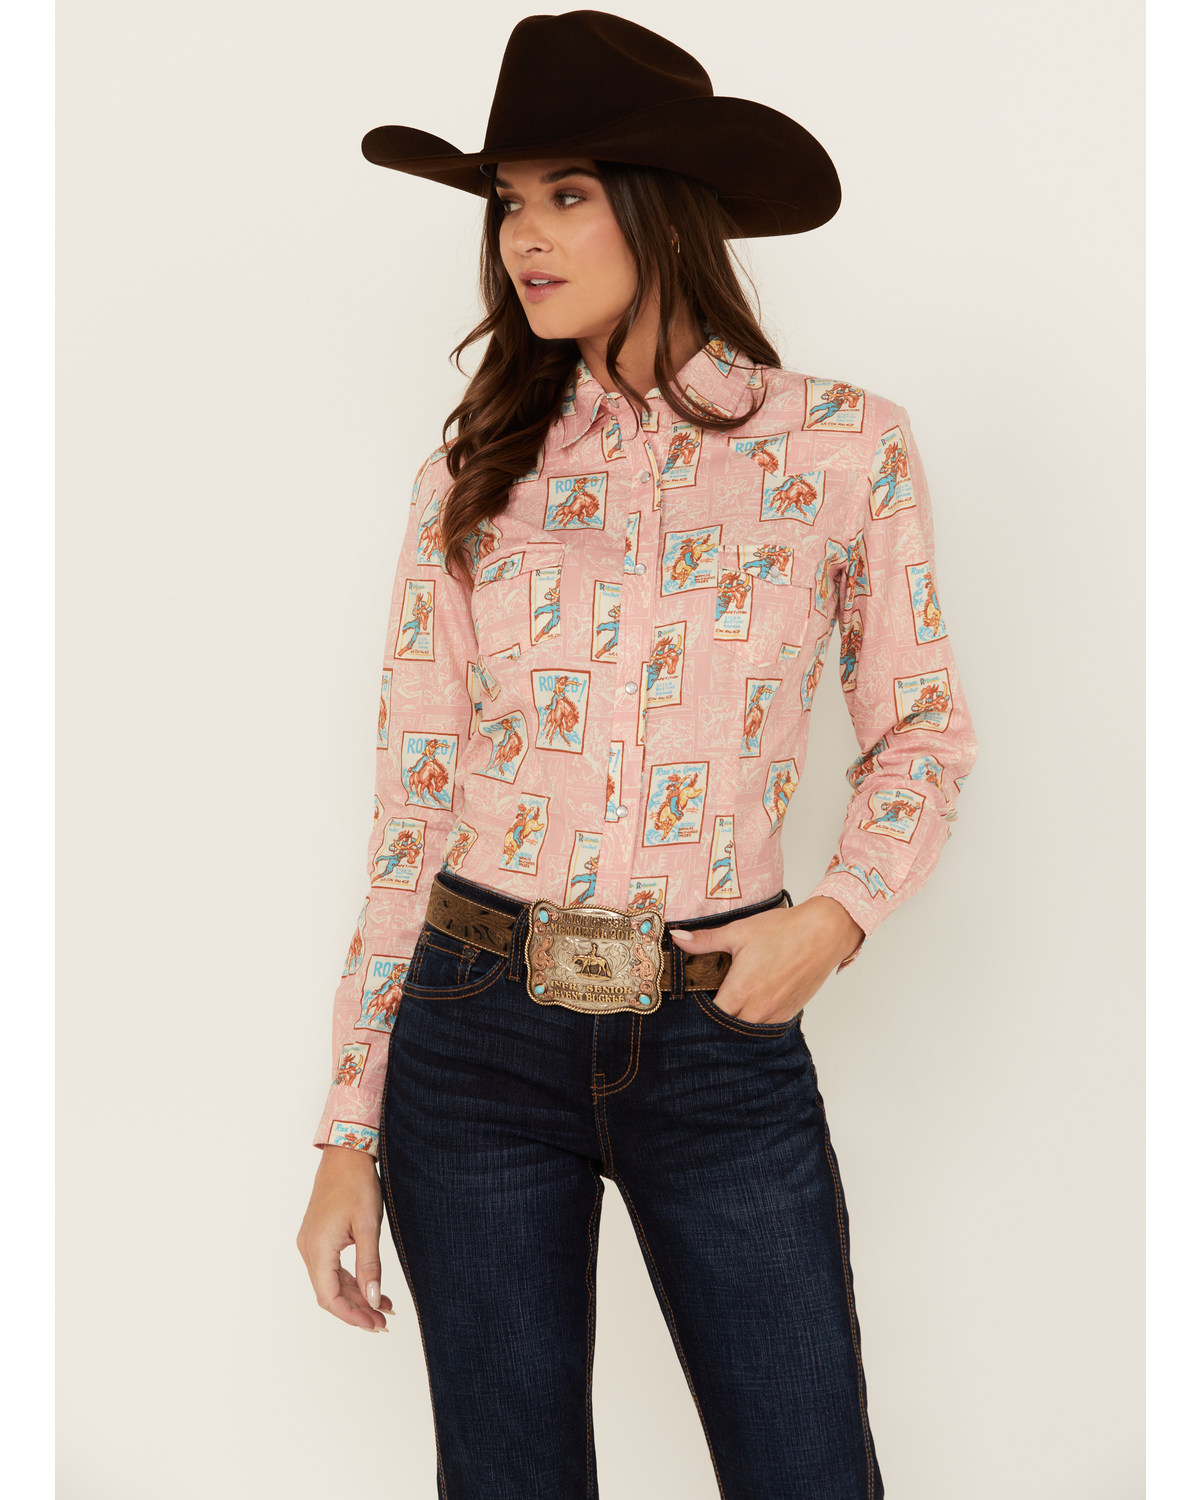 Panhandle Women's Rodeo Poster Print Long Sleeve Pearl Snap Western Shirt